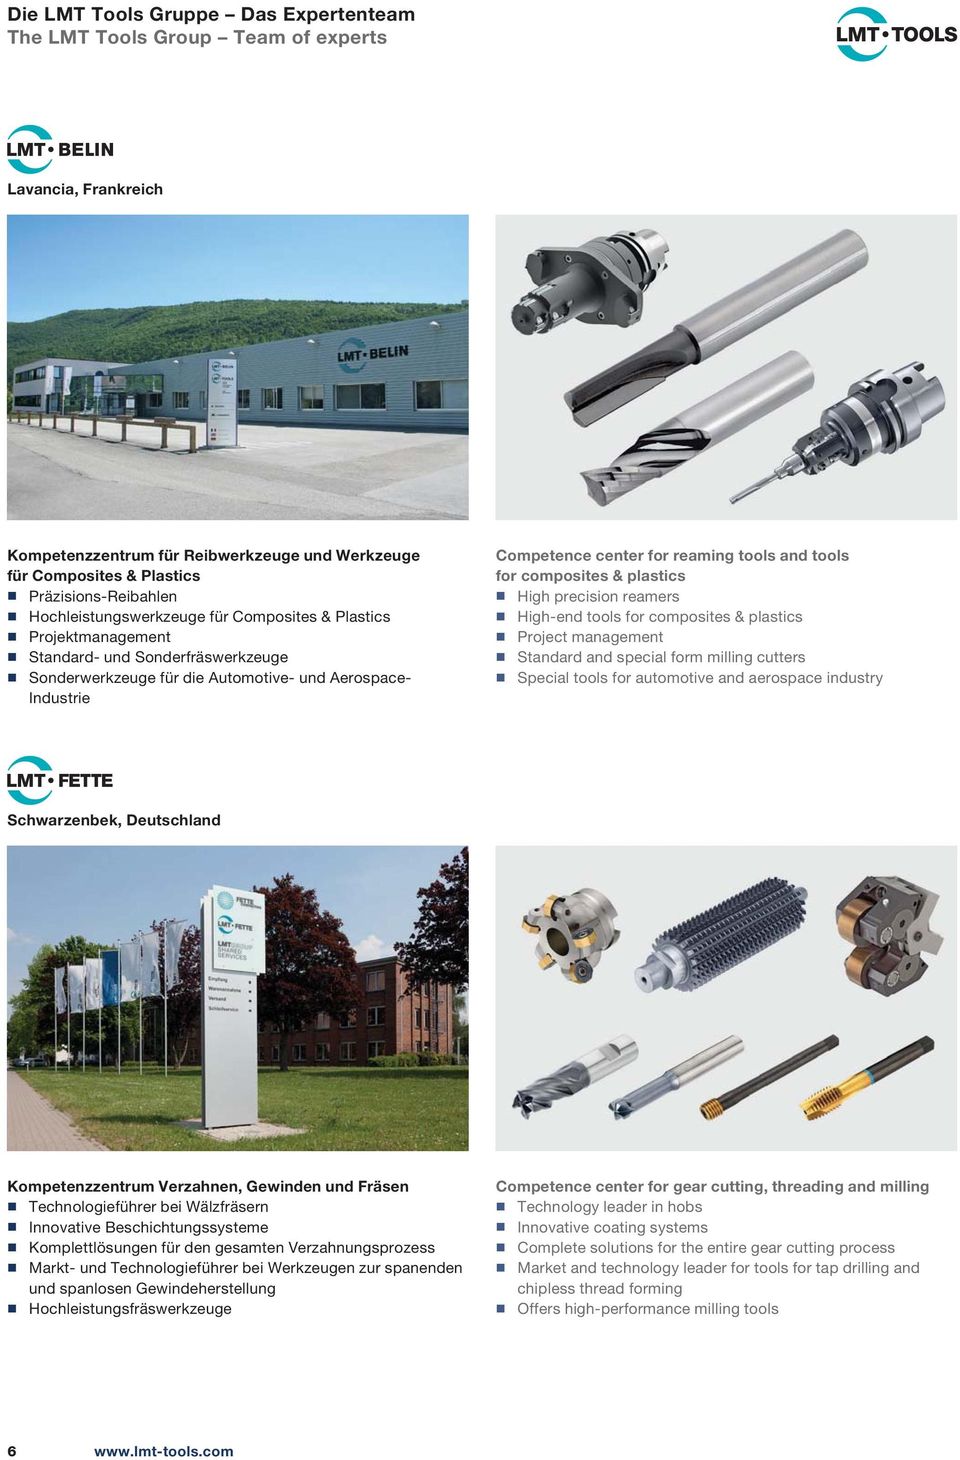 and tools for composites & plastics High precision reamers High-end tools for composites & plastics Project management Standard and special form milling cutters Special tools for automotive and